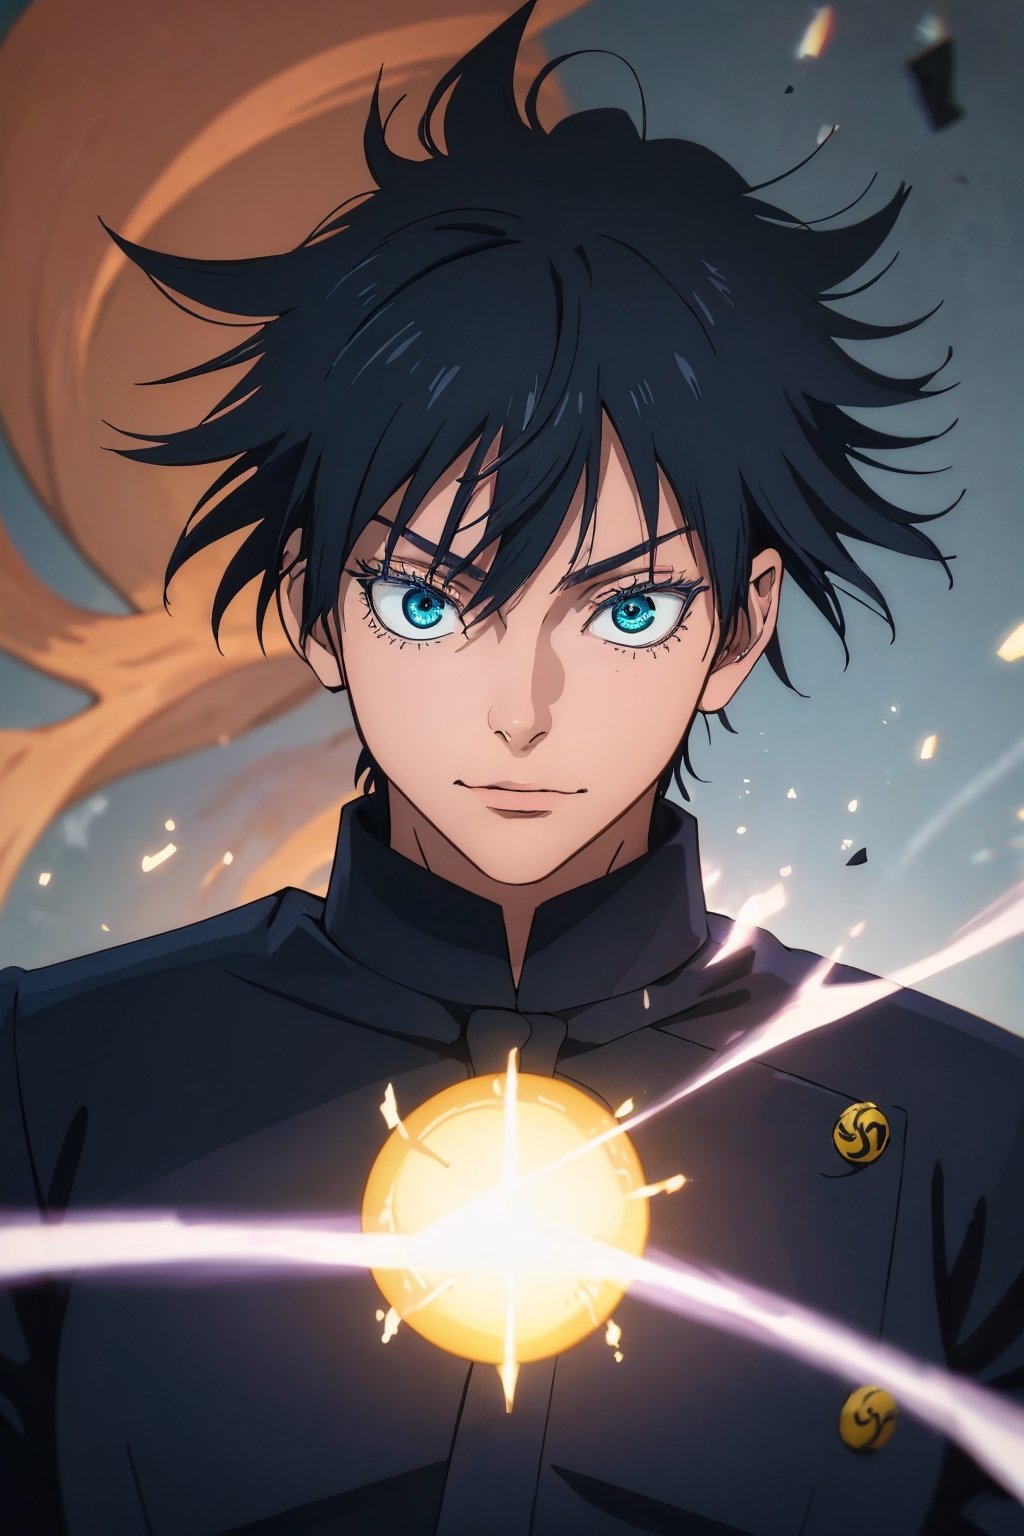 (best quality,4K,highres,masterpiece:1.2),ultra-detailed,realistic,ujutsu Kaisen, Satoru Gojo,colorful,vibrant colors,portraits,sharp focus,black hair,high collar uniform,expressive teal eyes,noble expression,ageless,calm demeanor,crimson blindfold,exquisite details,floating blue aura,dominant presence,immense power,unmatched skills,striking pose,glowing energy,blurry background,anime style